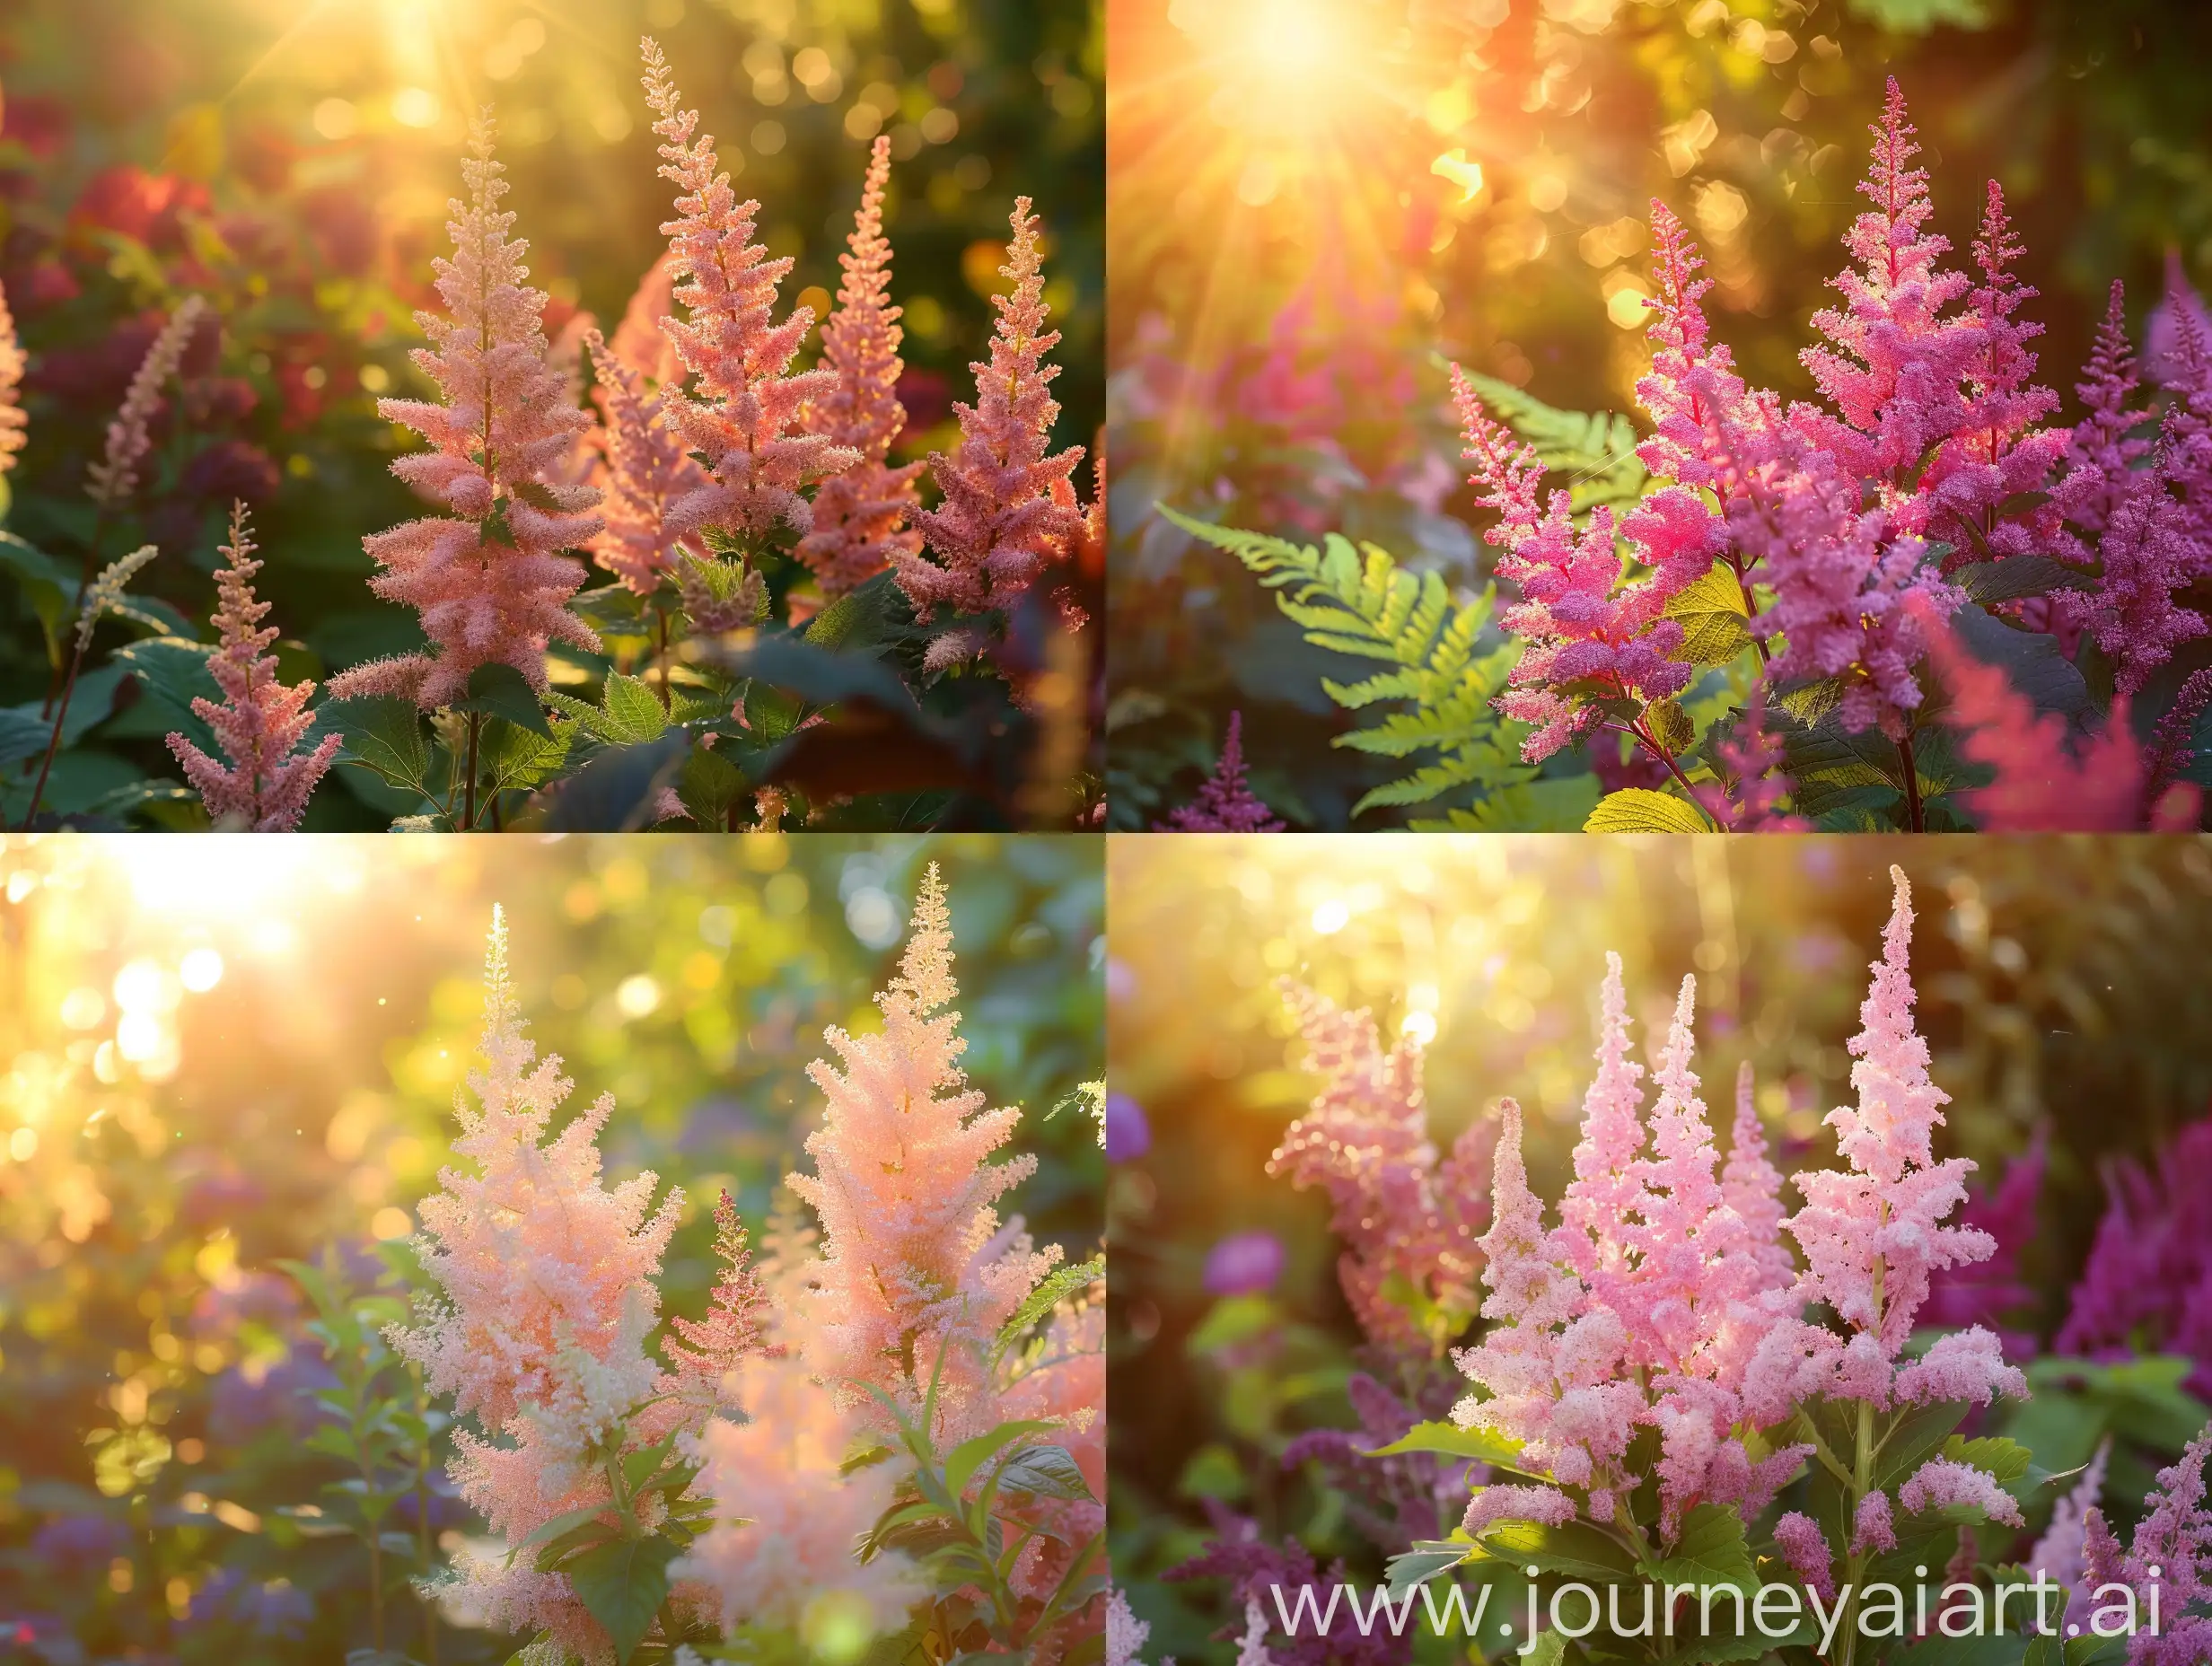 High detailed photo capturing a Astilbe, Younique Carmine. The sun, casting a warm, golden glow, bathes the scene in a serene ambiance, illuminating the intricate details of each element. The composition centers on a Astilbe, Younique Carmine. The soft, feathery plumes of these astilbes are a welcome sight in spring and will brighten any shady space. Clumps form rapidly, with glossy, deep green, lacy foliage that makes an excellent ground cover. Best grown in drifts with heucheras, ferns, helle. The image evokes a sense of tranquility and natural beauty, inviting viewers to immerse themselves in the splendor of the landscape. --ar 16:9 